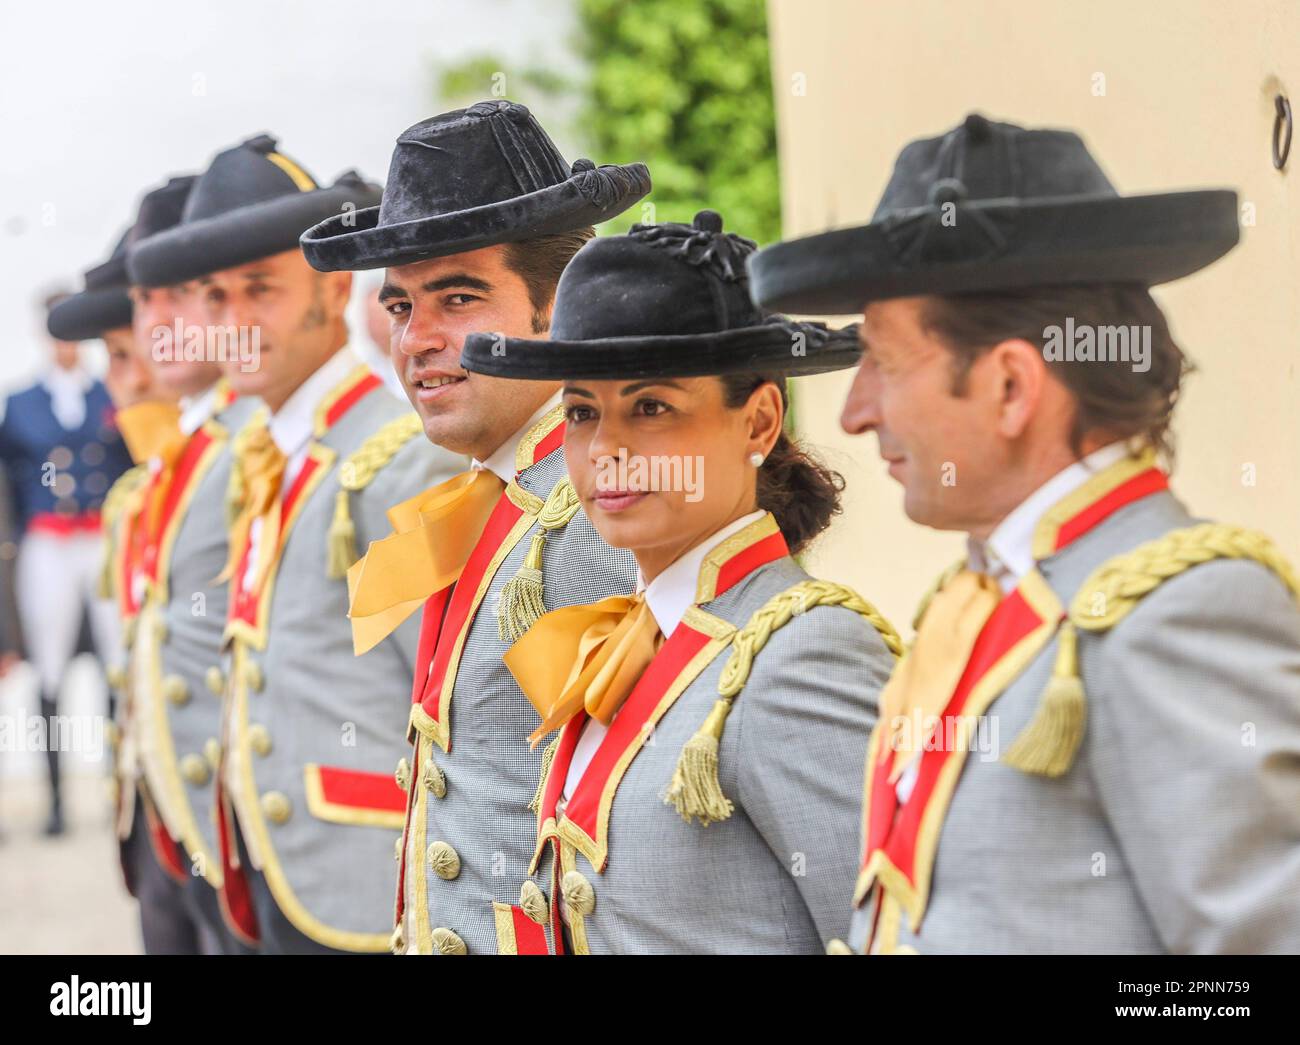 April 19, 2023 (Ronda, Malaga) Felipe VI is received by dozens of people upon his arrival at the bullring to participate in the commemoration of the 450th anniversary of the Real Maestranza de Caballería de Ronda. It was attended by some 2,500 schoolchildren from the Serranía de Ronda. Credit: CORDON PRESS/Alamy Live News Stock Photo